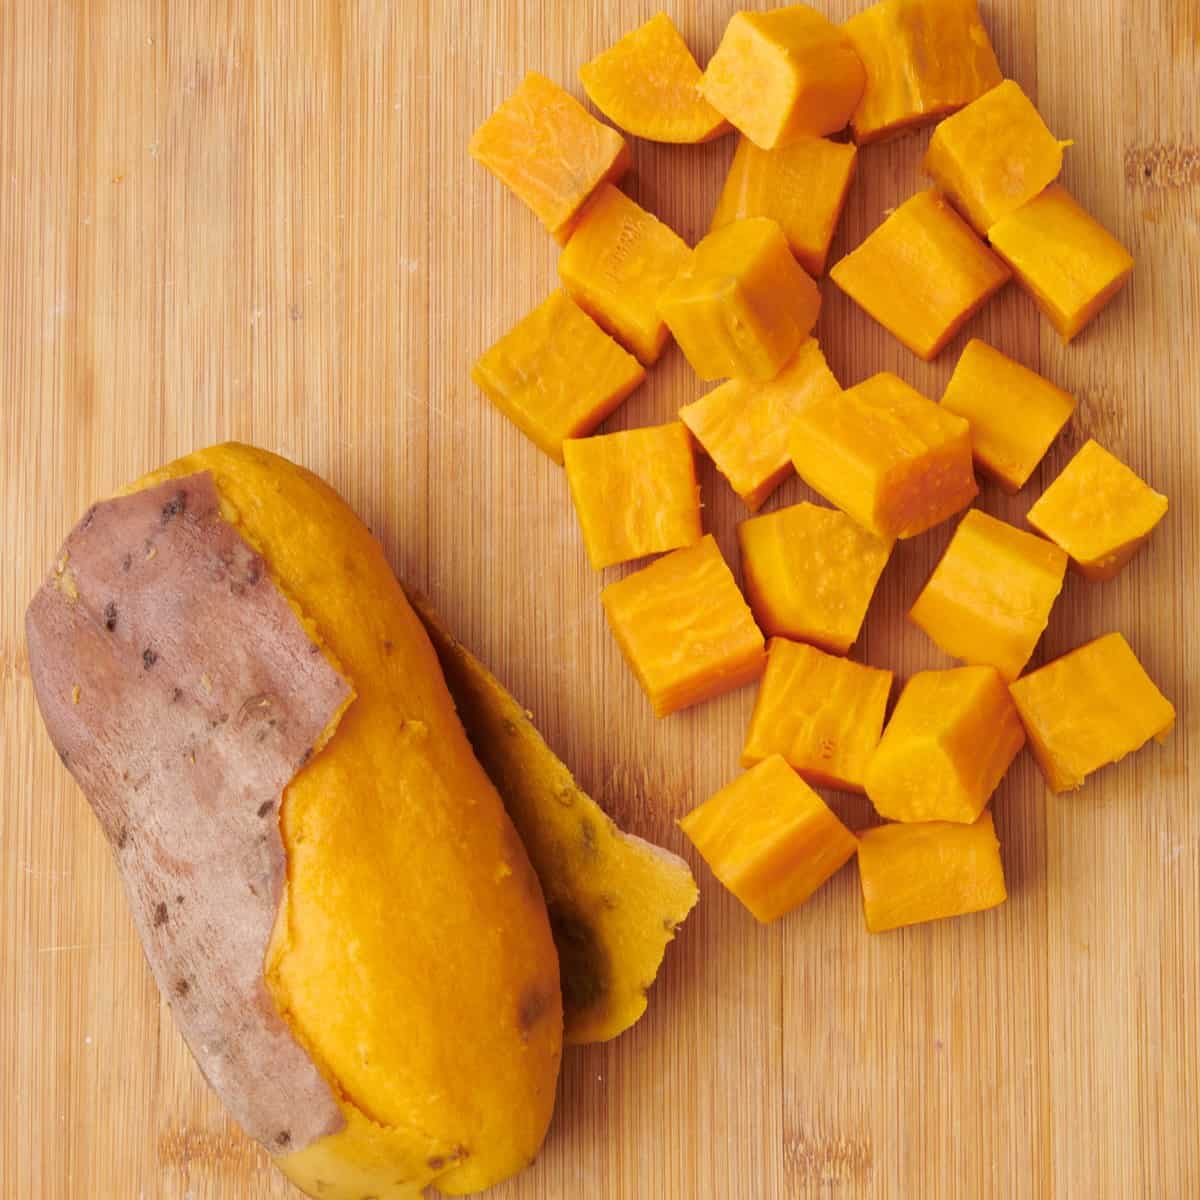 Boiled sweet potatoes on a cutting board 2 ways: whole and cubed.